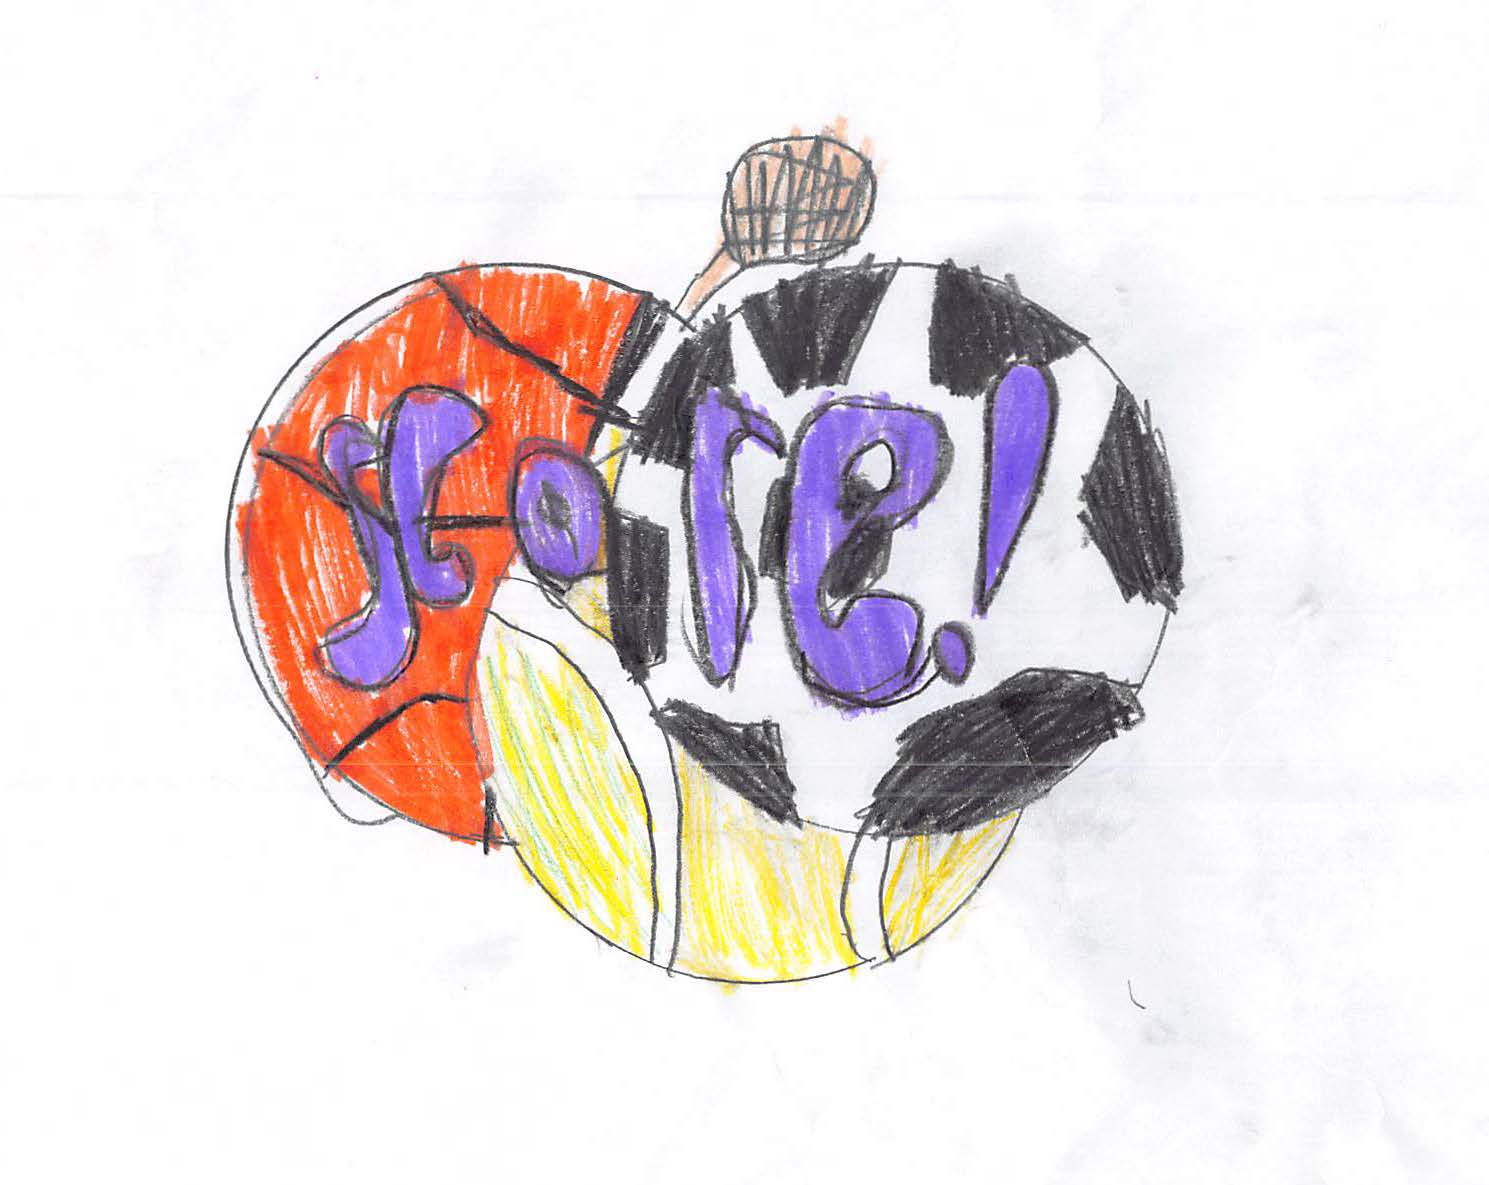 Pencil crayon drawing for the SCORE! logo contest. The drawing includes a basketball, soccer ball, and tennis ball.